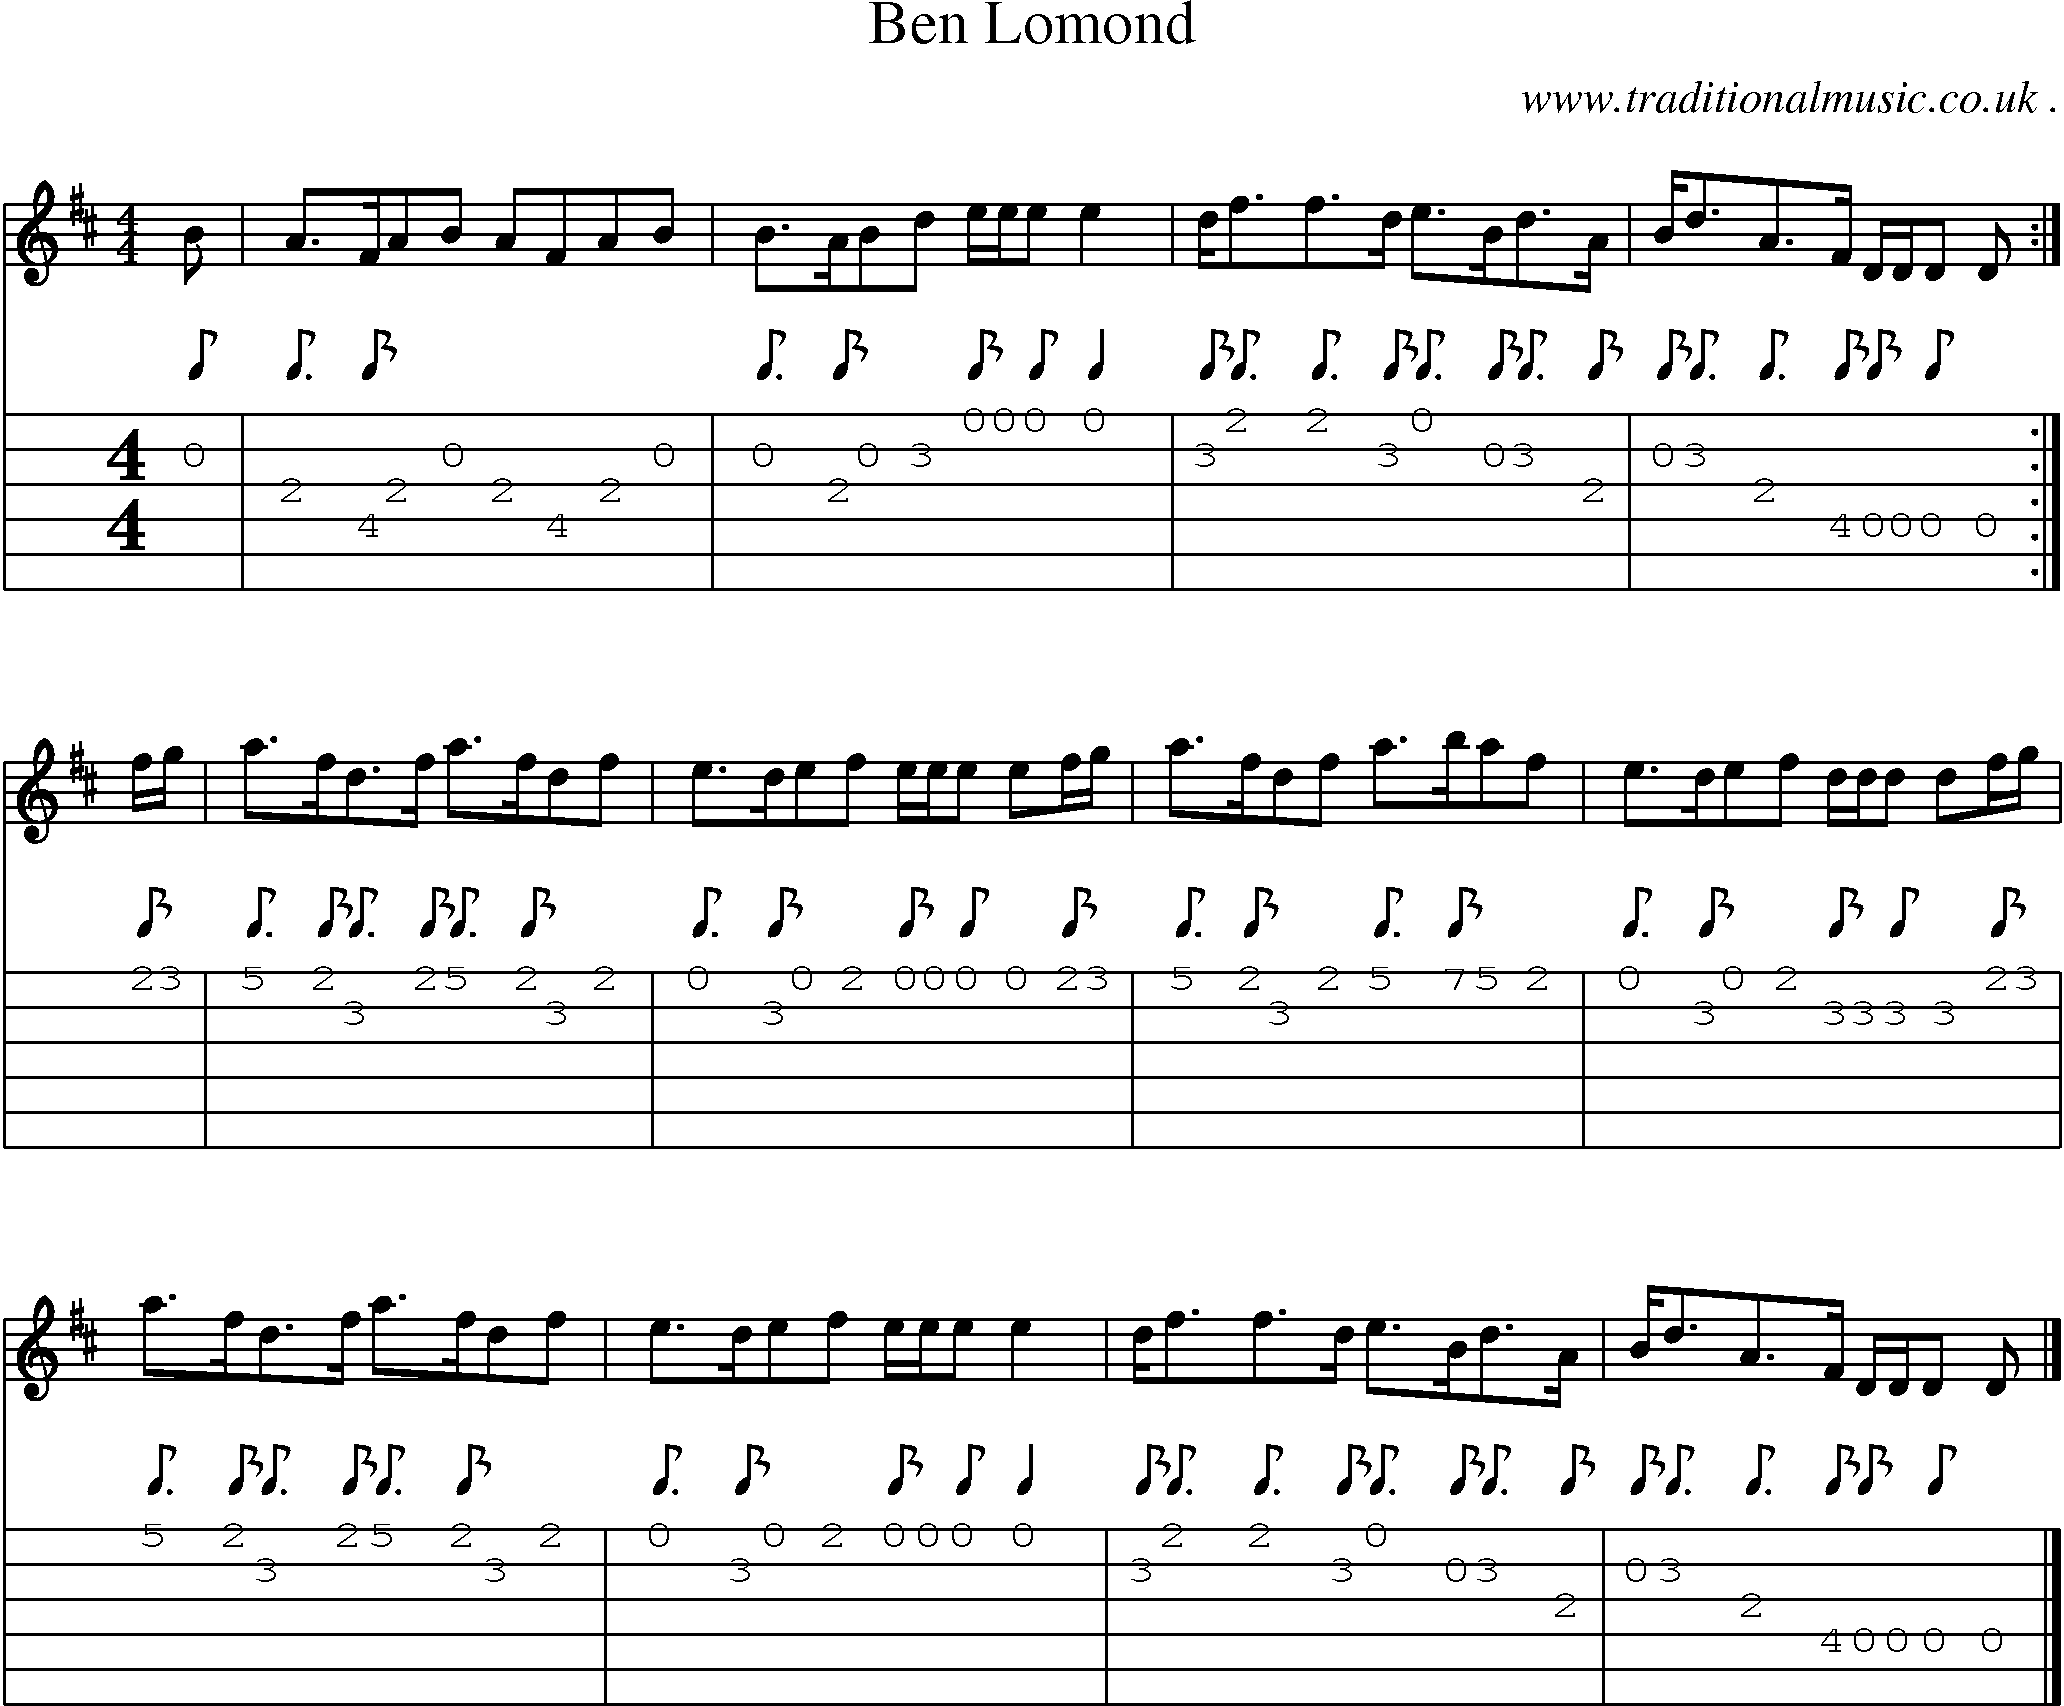 Sheet-music  score, Chords and Guitar Tabs for Ben Lomond 